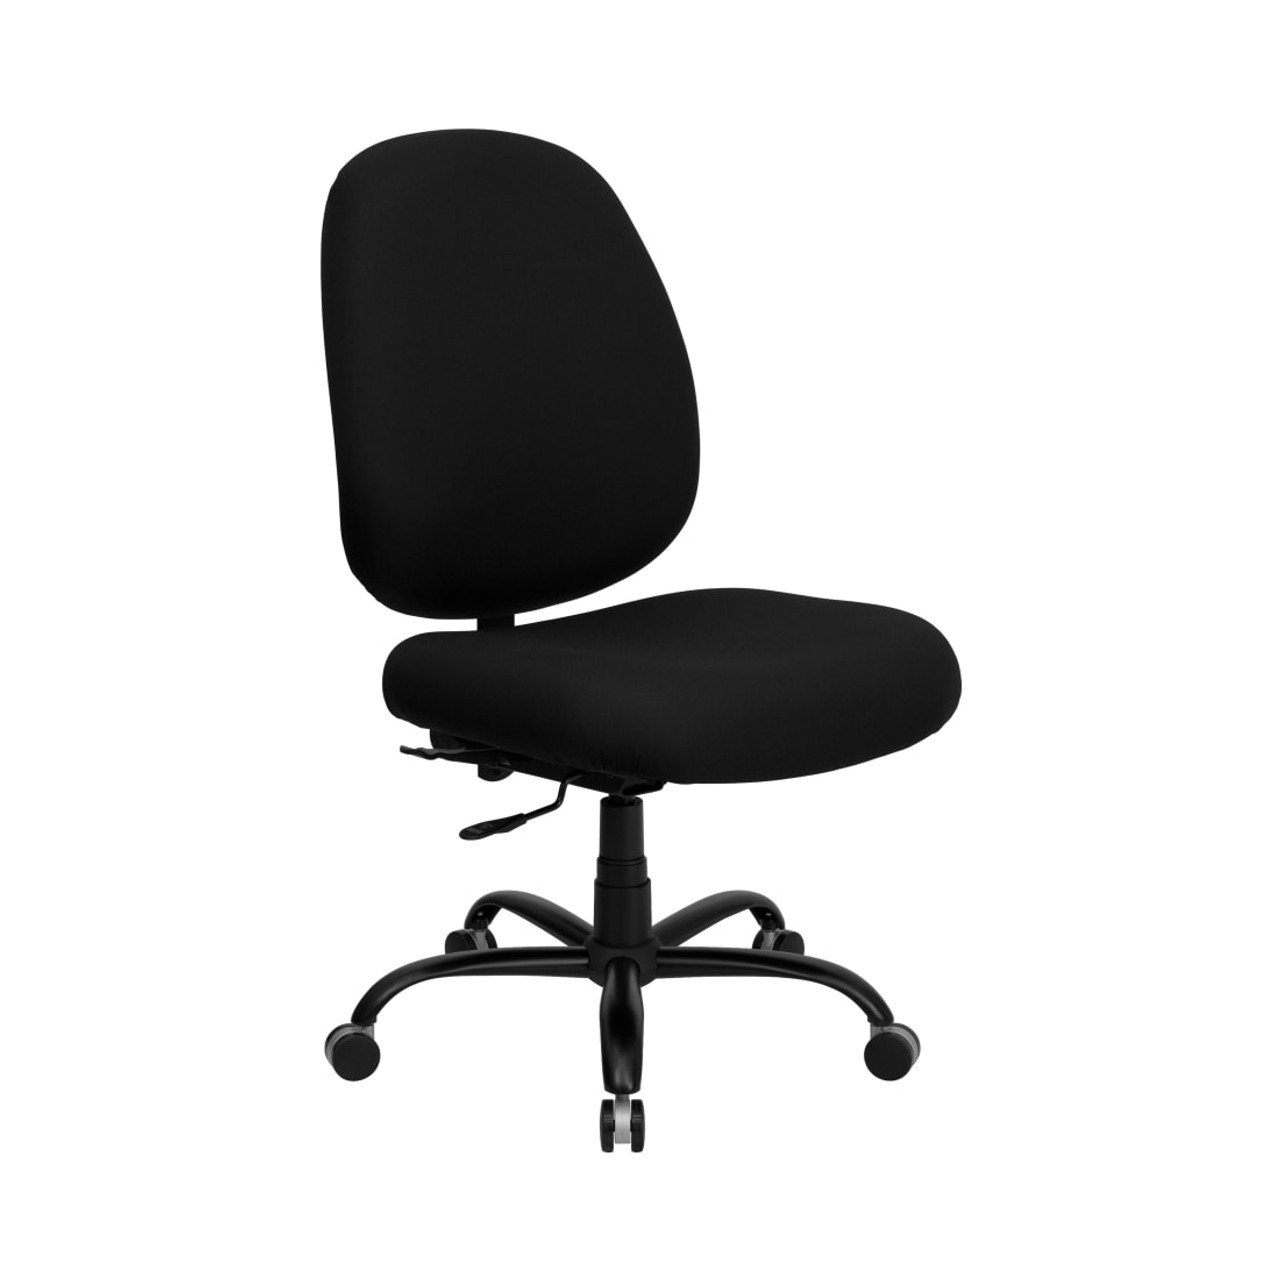 HERCULES Series Big & Tall 400 lb. Rated Black Fabric Executive Swivel Ergonomic Office Chair with Adjustable Back - WL715MGBKGG